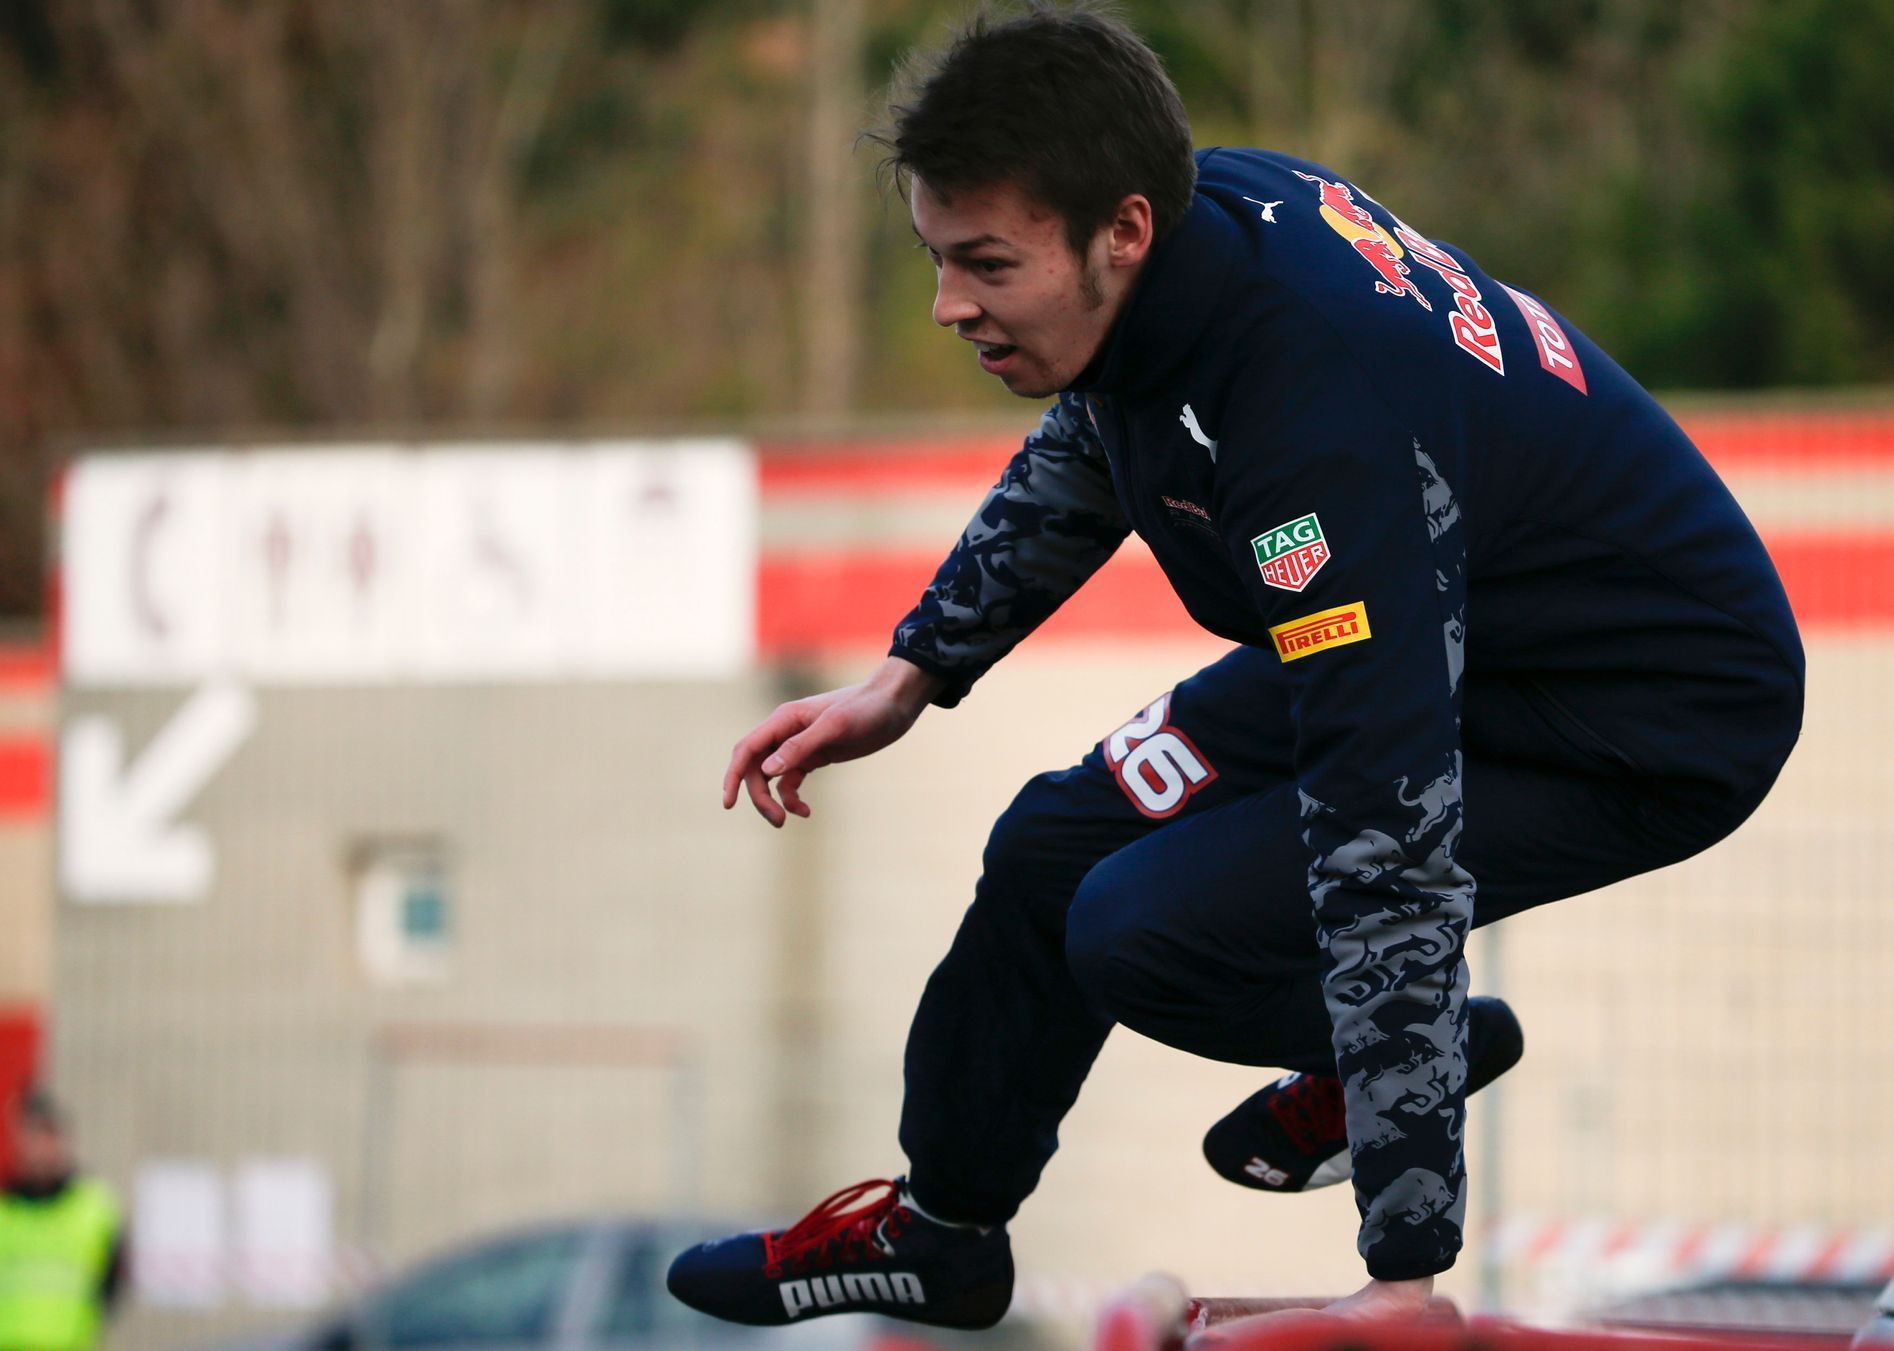 Red Bull Formula One driver Kvyat of Russia jumps a fence as he warms up in the paddock before the fourth testing session ahead the upcoming season at the Circuit Barcelona-Catalunya in Montmelo